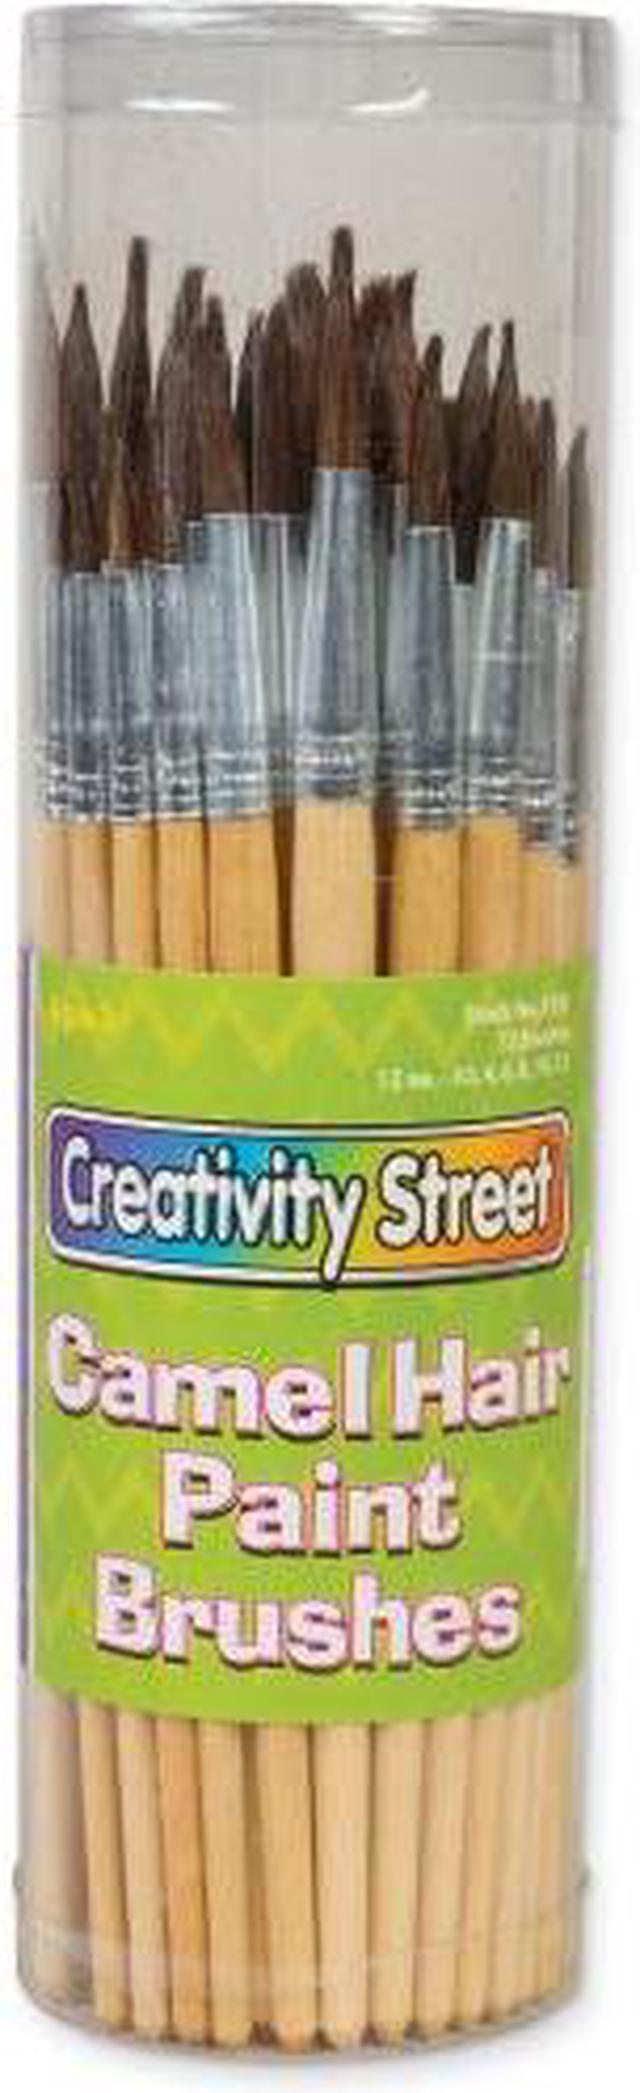 Creativity Street Wooden Paint Brush Stand, Holds 24 Brushes, 5 x 8-1/4  Inches